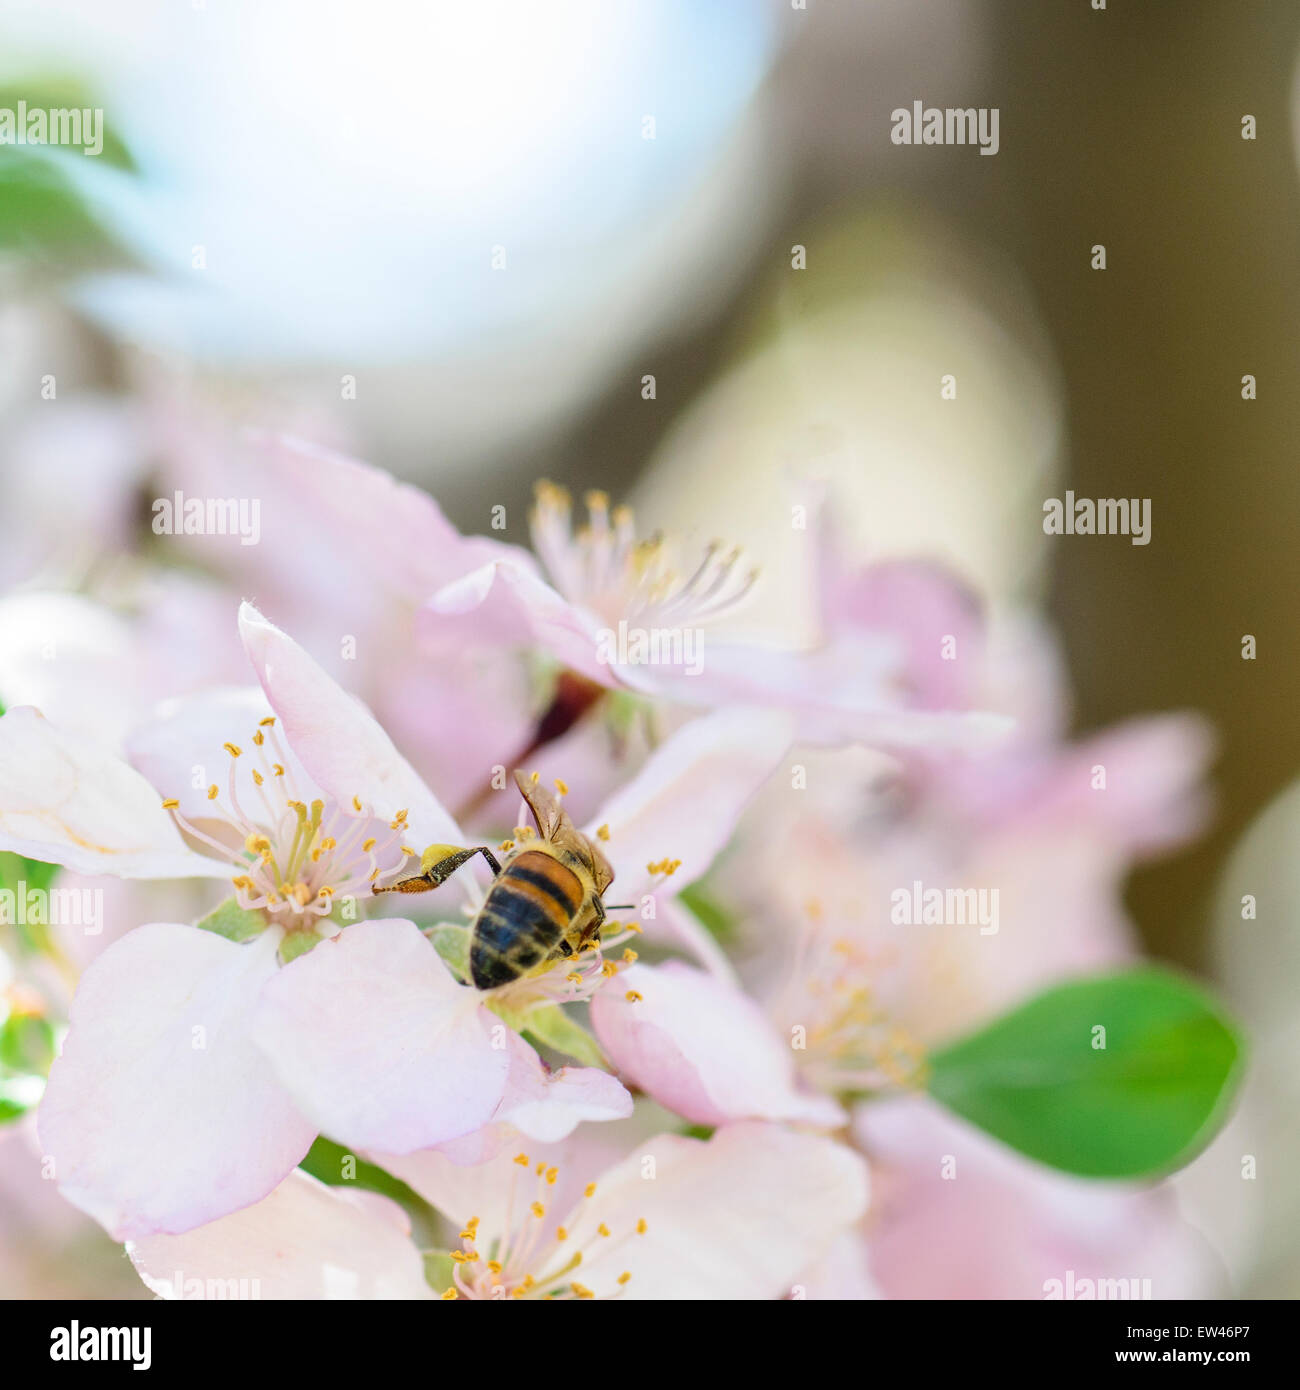 A honeybee gathers pollen from crabpple, Malus, blossoms in the spring. Oklahoma, USA. Stock Photo